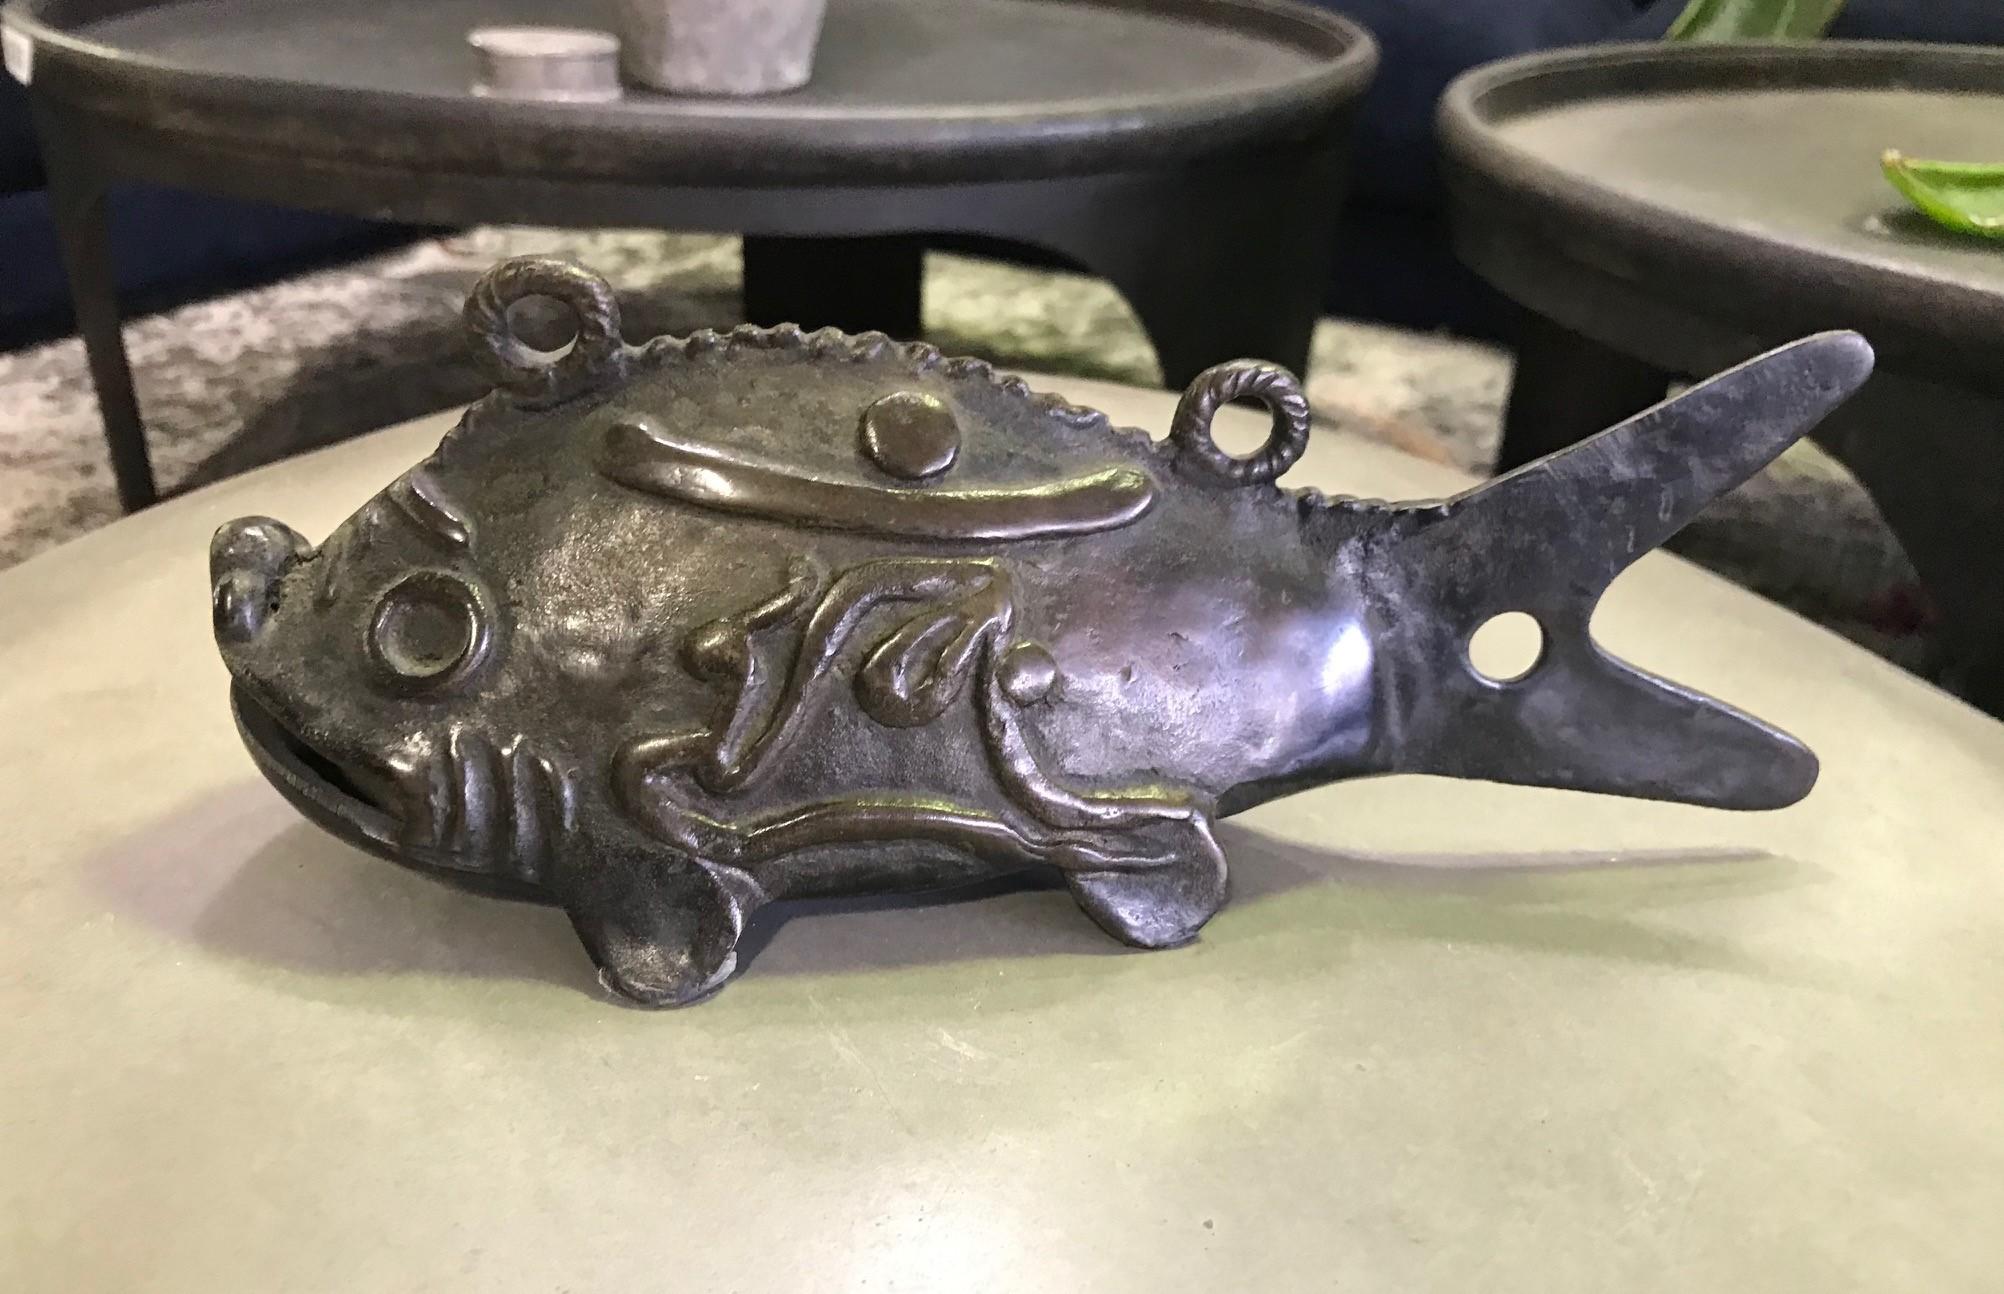 A fantastic, heavy bronze Japanese hanging fish (likely Koi) bell/ chime from the late Edo period. The patina on the piece is superb. It glows in the light. The fish has two top loops for hanging and Japanese kanji characters on each side.

This